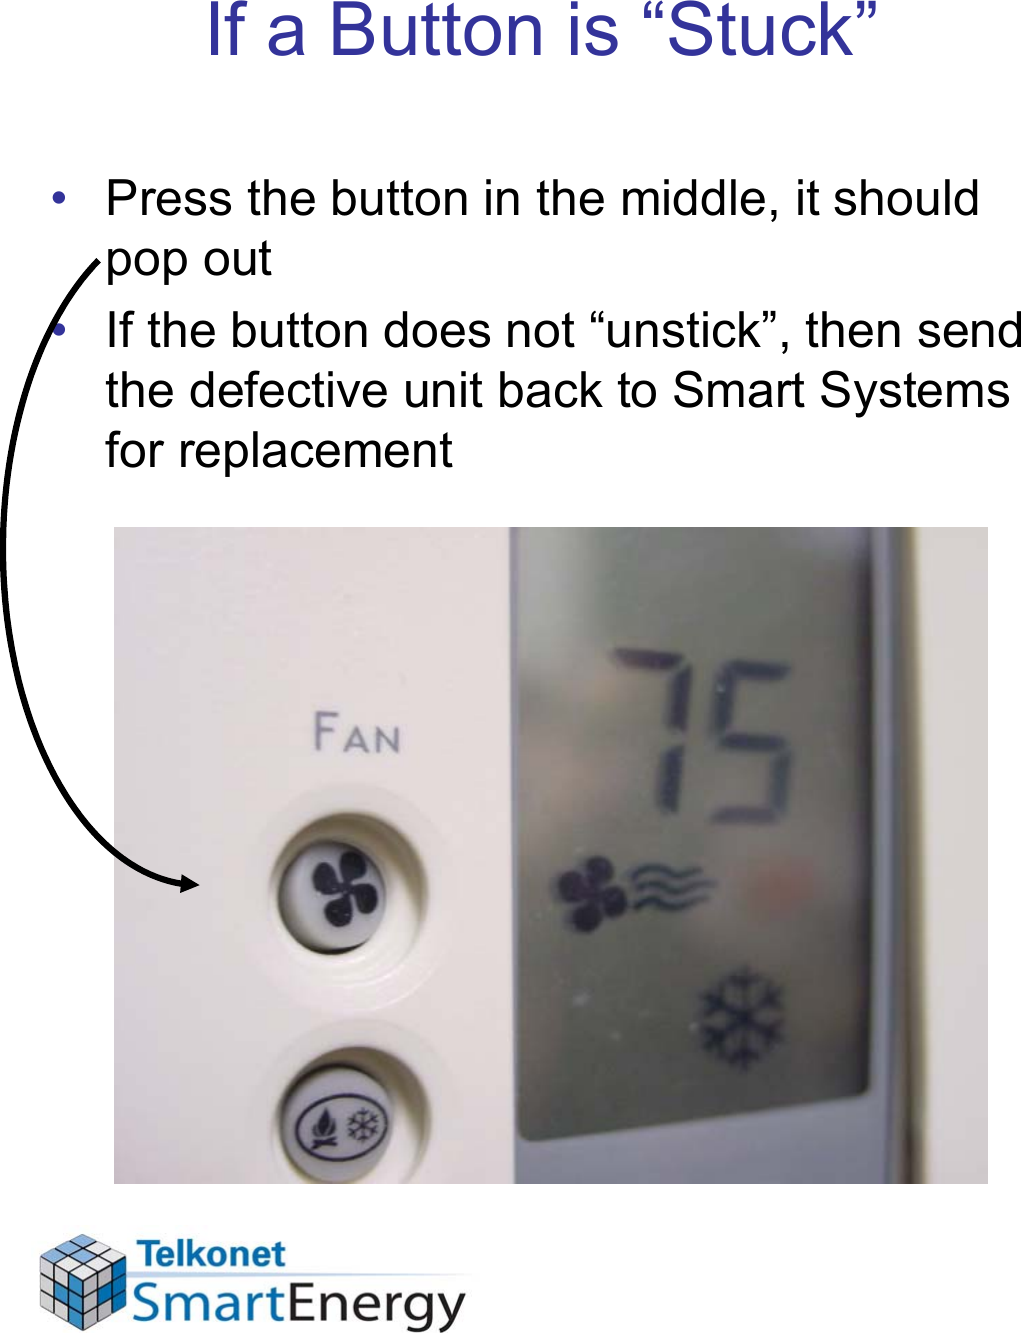 If a Button is “Stuck”• Press the button in the middle, it should pop out• If the button does not “unstick”, then send the defective unit back to Smart Systems for replacement